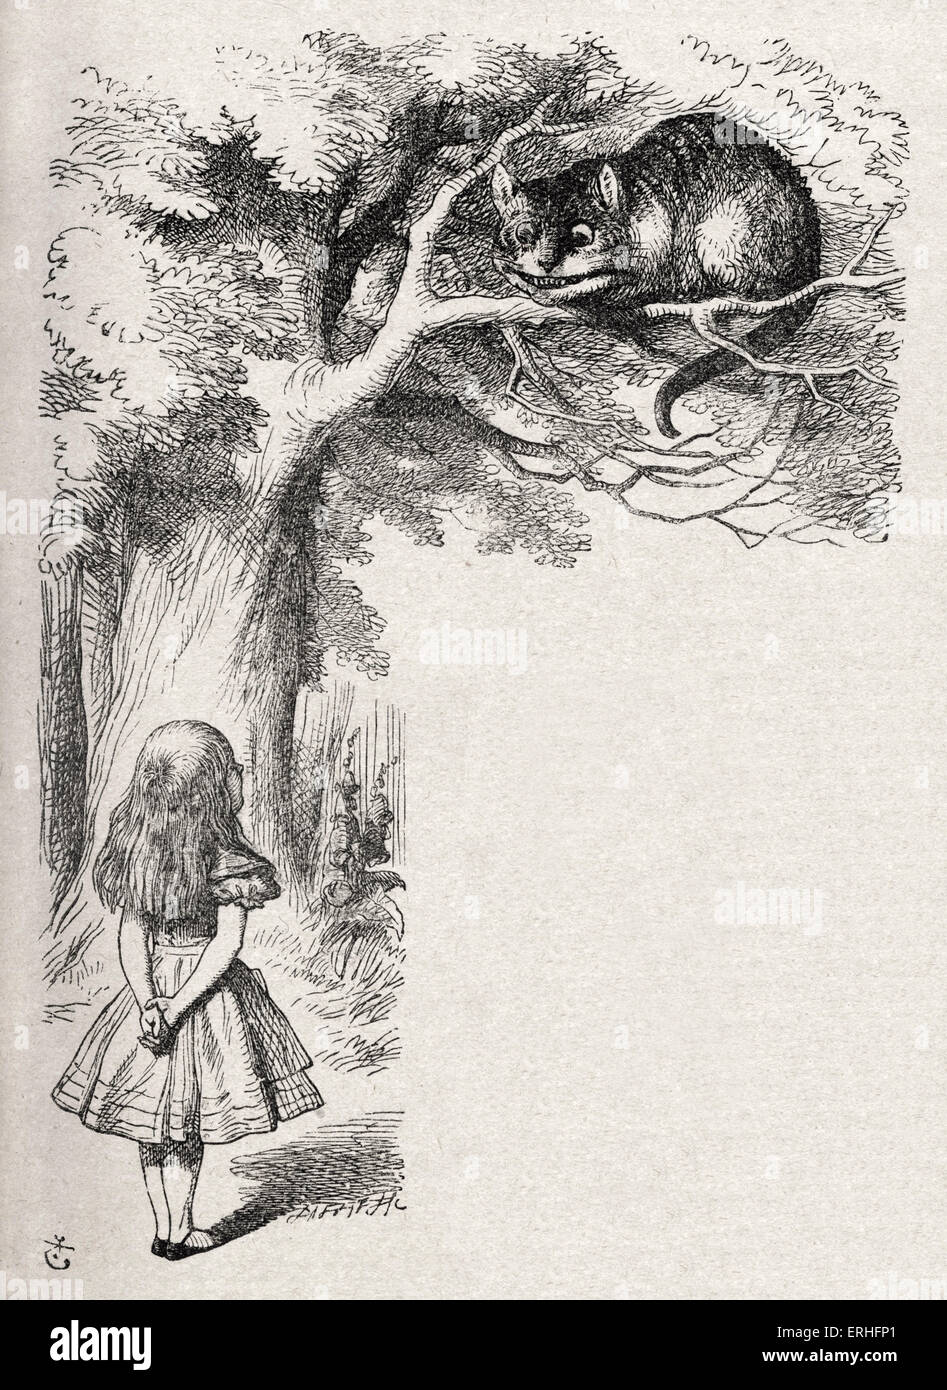 Alice and the Cheshire Cat, from Alice in Wonderland by Lewis Carroll (Charles Lutwidge Dodgson), English children's writer and Stock Photo